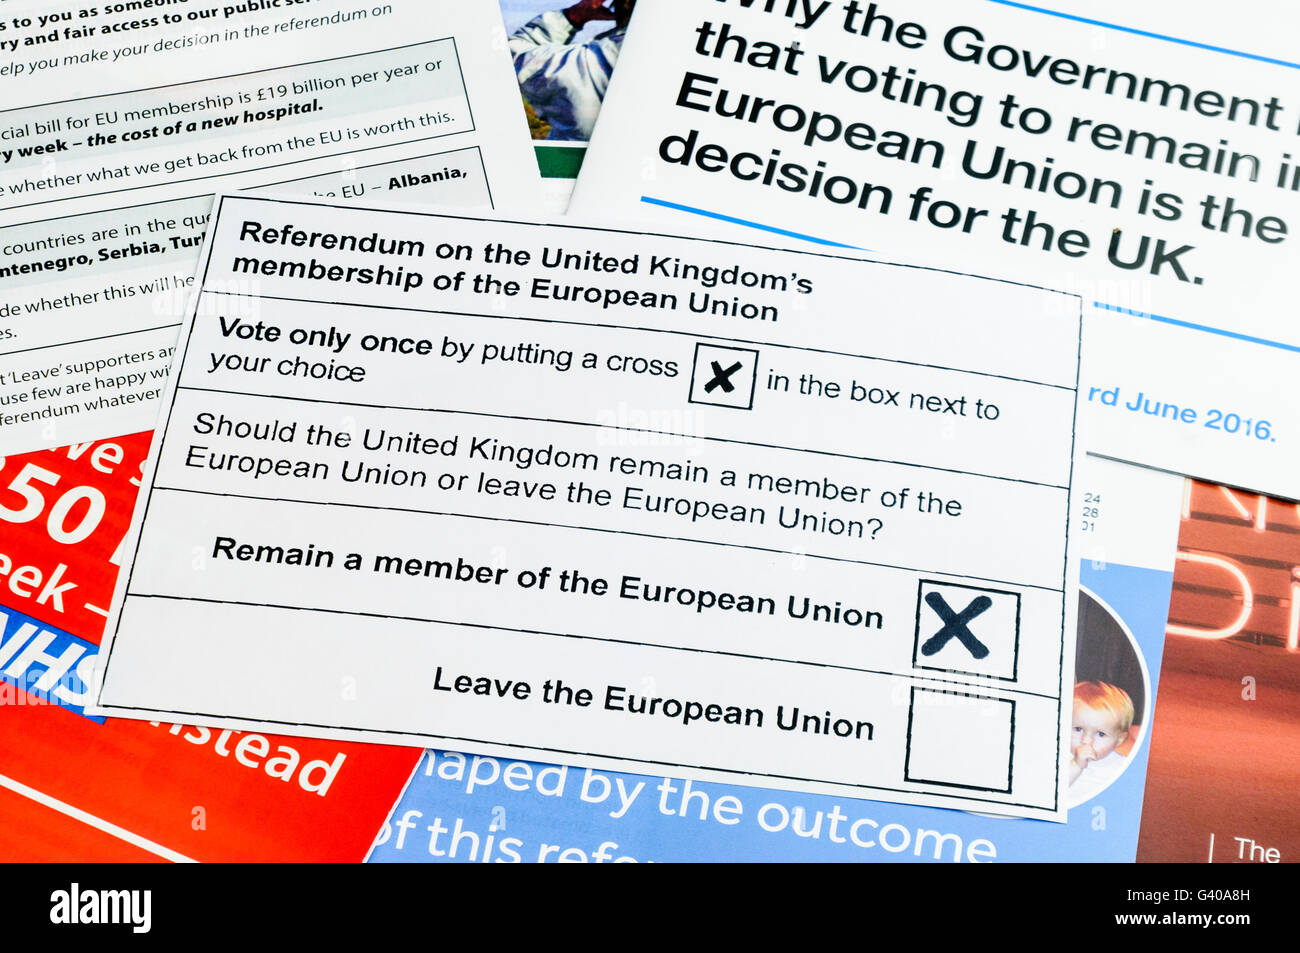 UK Referendum voting slip with a vote to remain as a member of the European Union on top of campaign literature from both the 'leave' (Brexit) and 'remain' (Bremain) camps (mock voting slip) Stock Photo